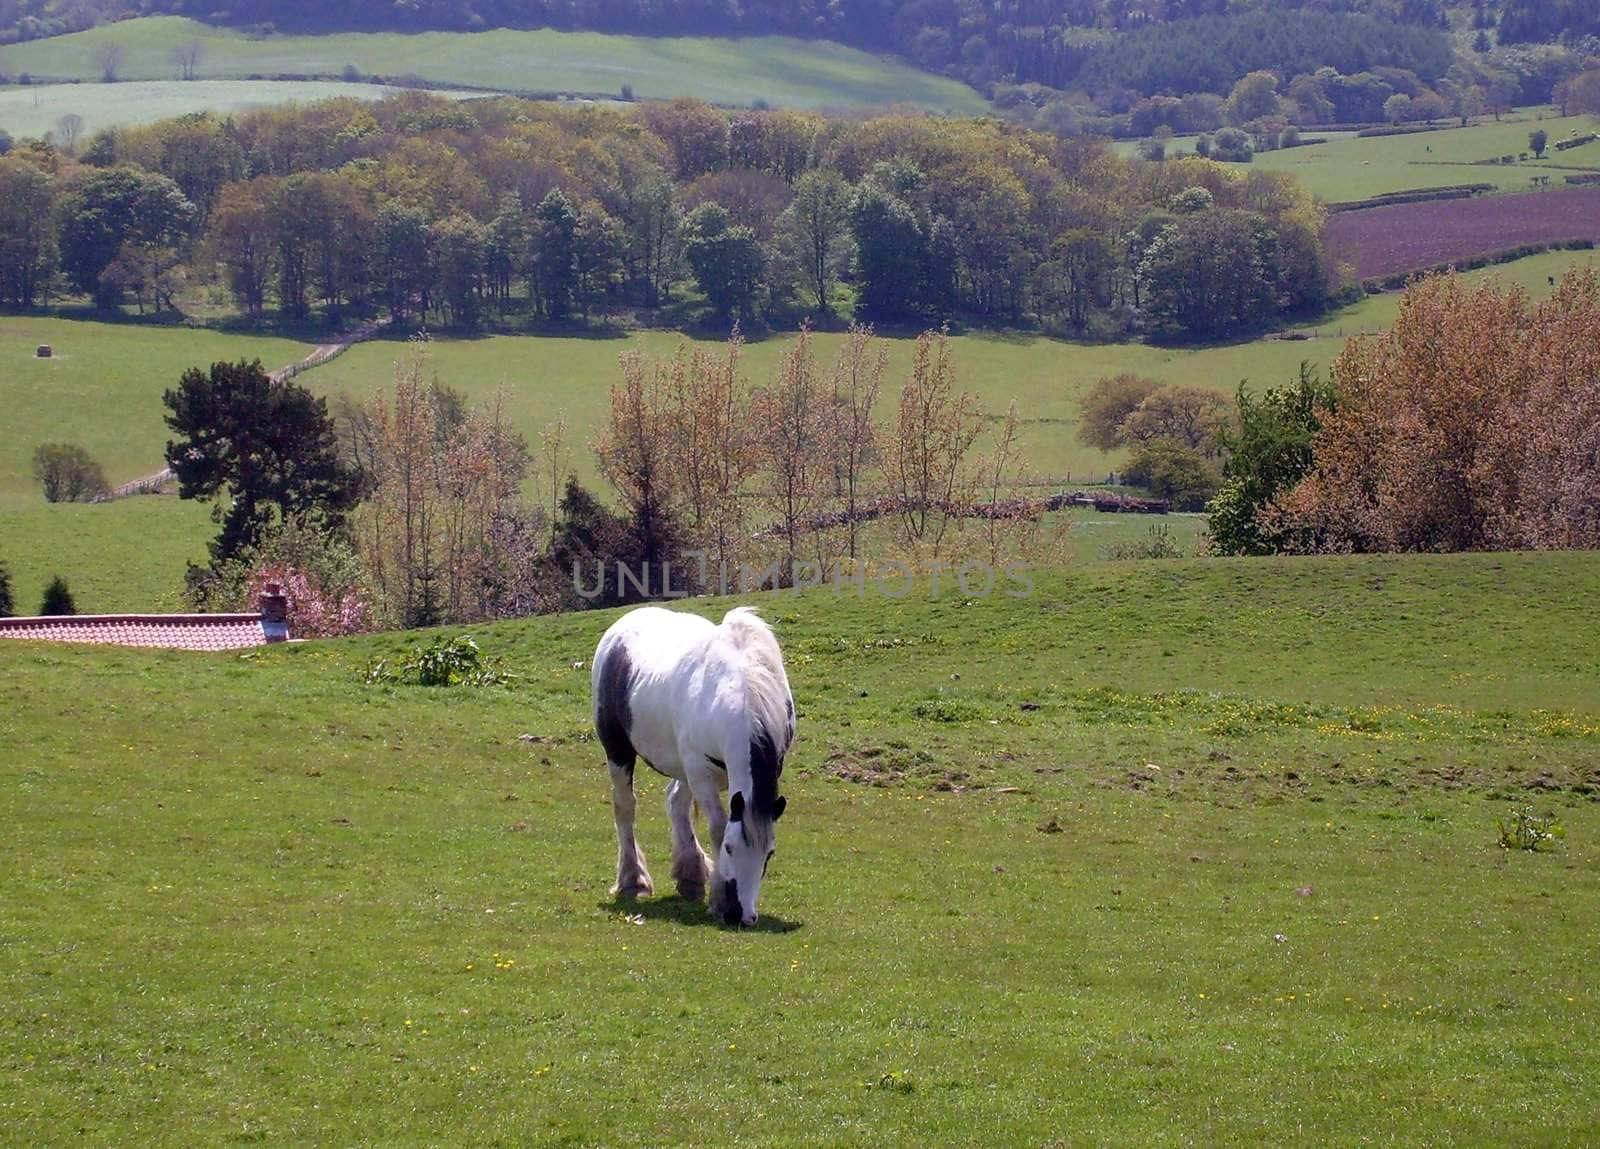 Horse standing in rural countryside landscape of North Yorkshire Moors National Park, England.